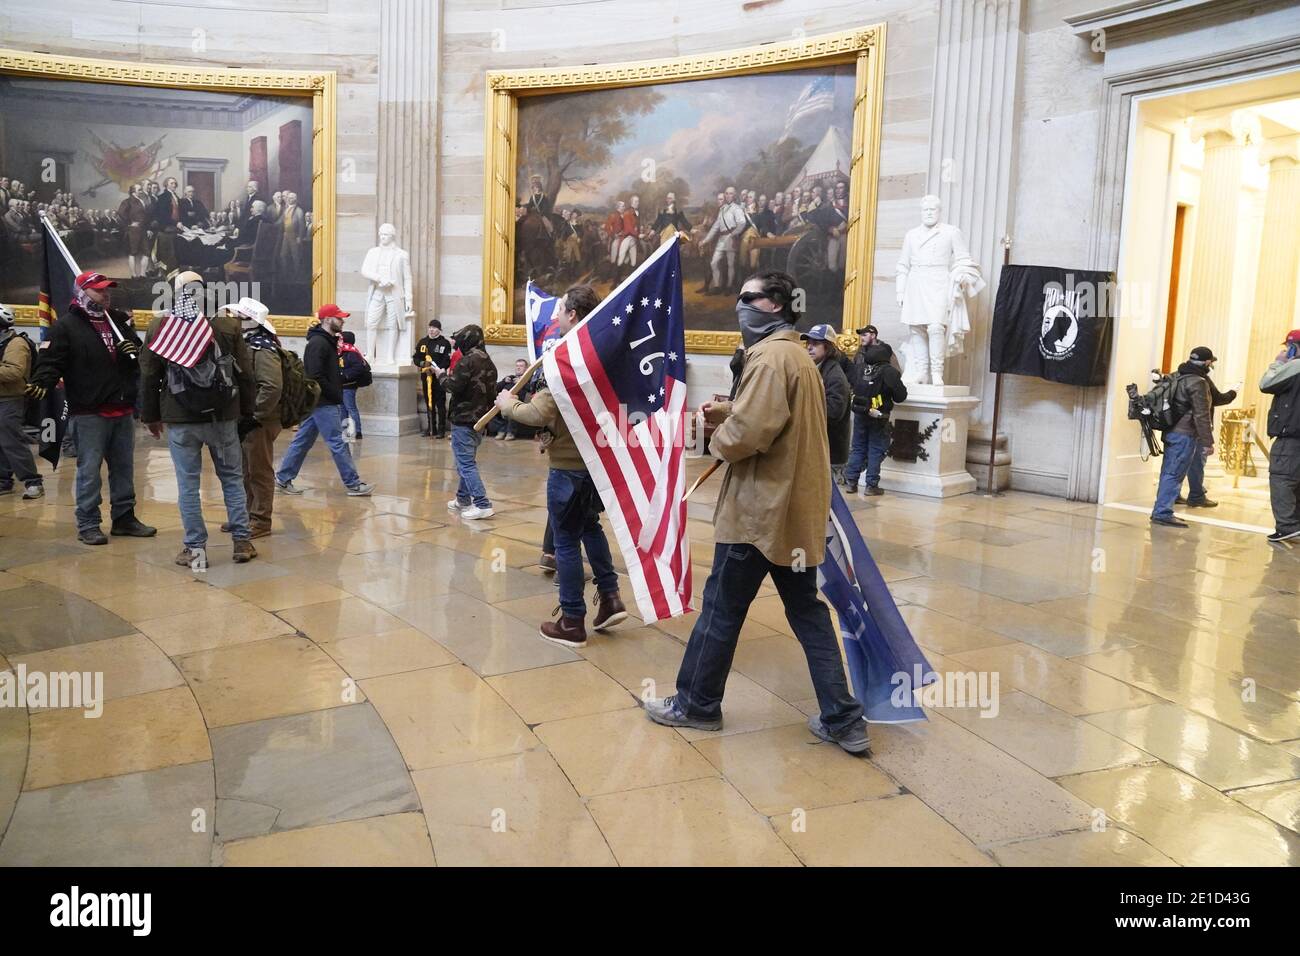 Washington, USA. 06th Jan, 2021. Protestors enter the Capitol building during a joint session of Congress in Washington, DC on Wednesday, January 6, 2021. The joint session of the House and Senate was sent to recess after the breach as it convened to confirm the Electoral College votes cast in November's election. (Photo by Chris Kleponis/Sipa USA) Credit: Sipa USA/Alamy Live News Stock Photo